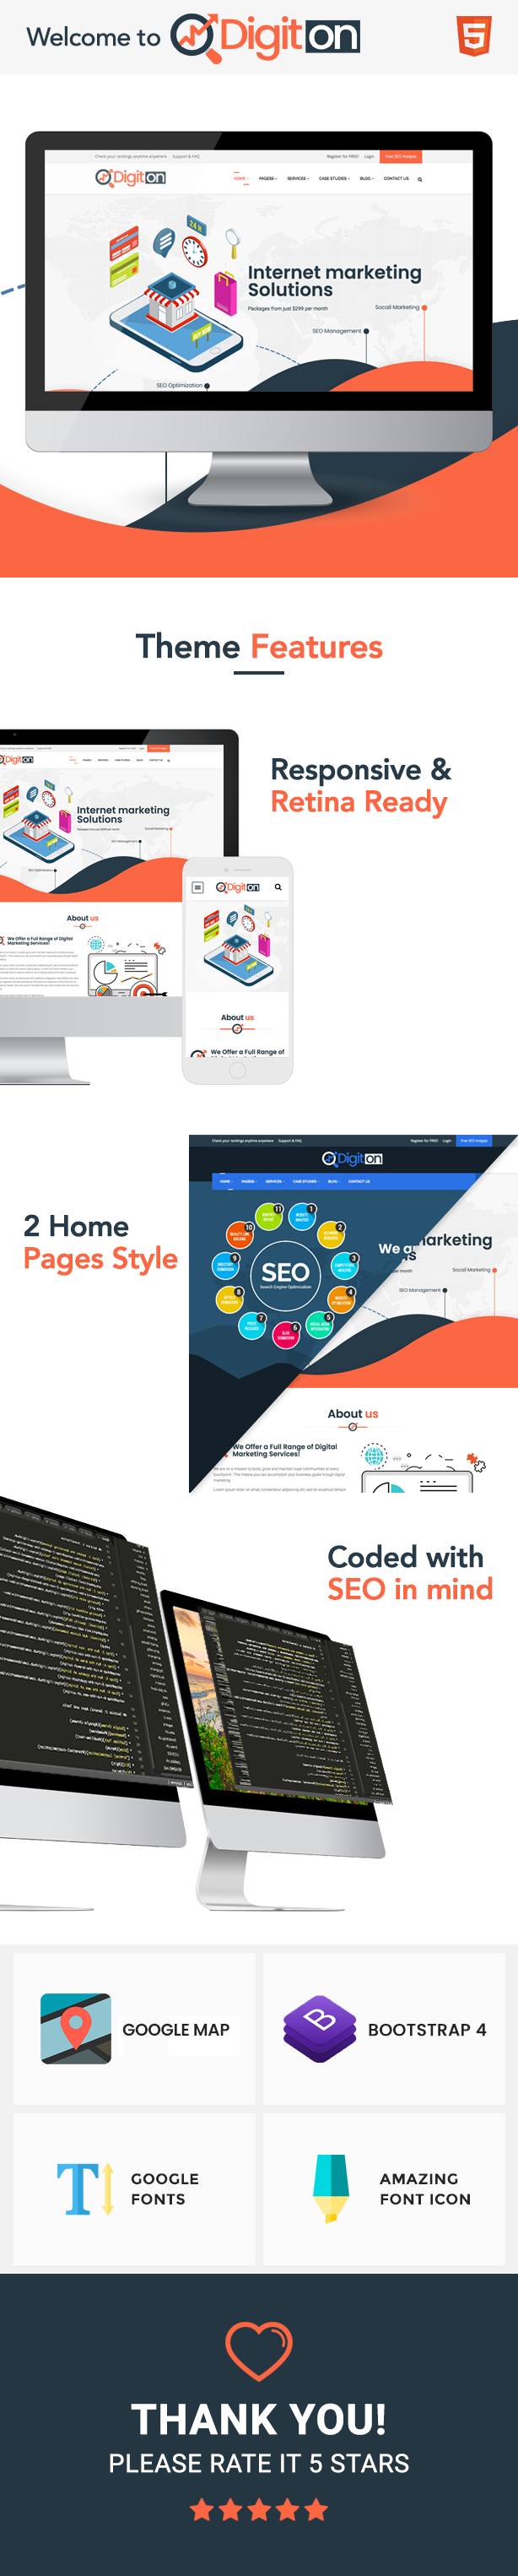 Digiton - SEO and Digital Agency HTML Template - 1